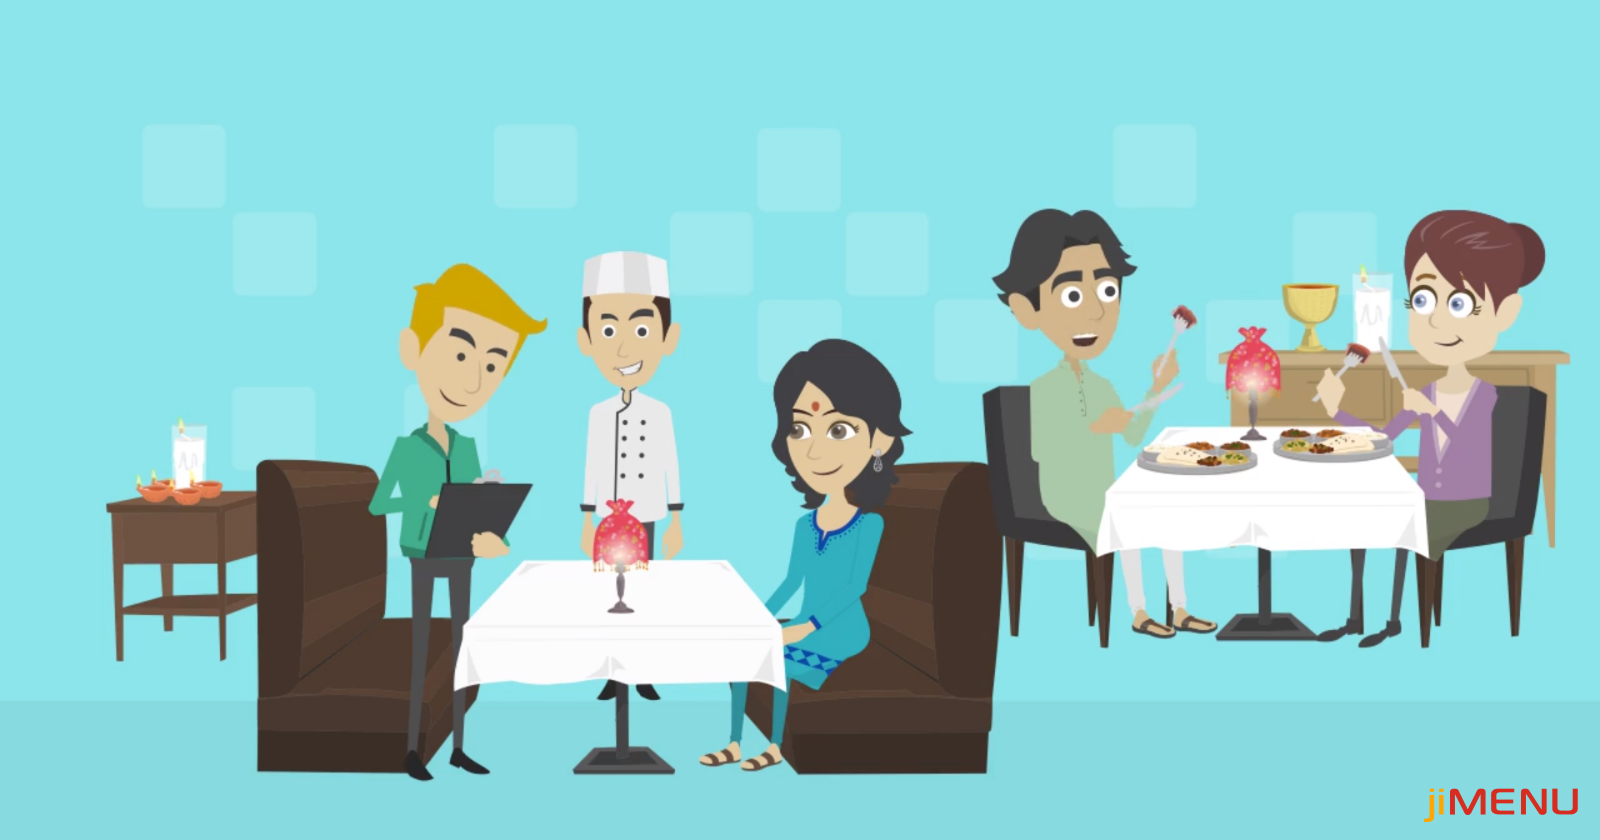 Know how Customer Feedback can affect your Restaurant